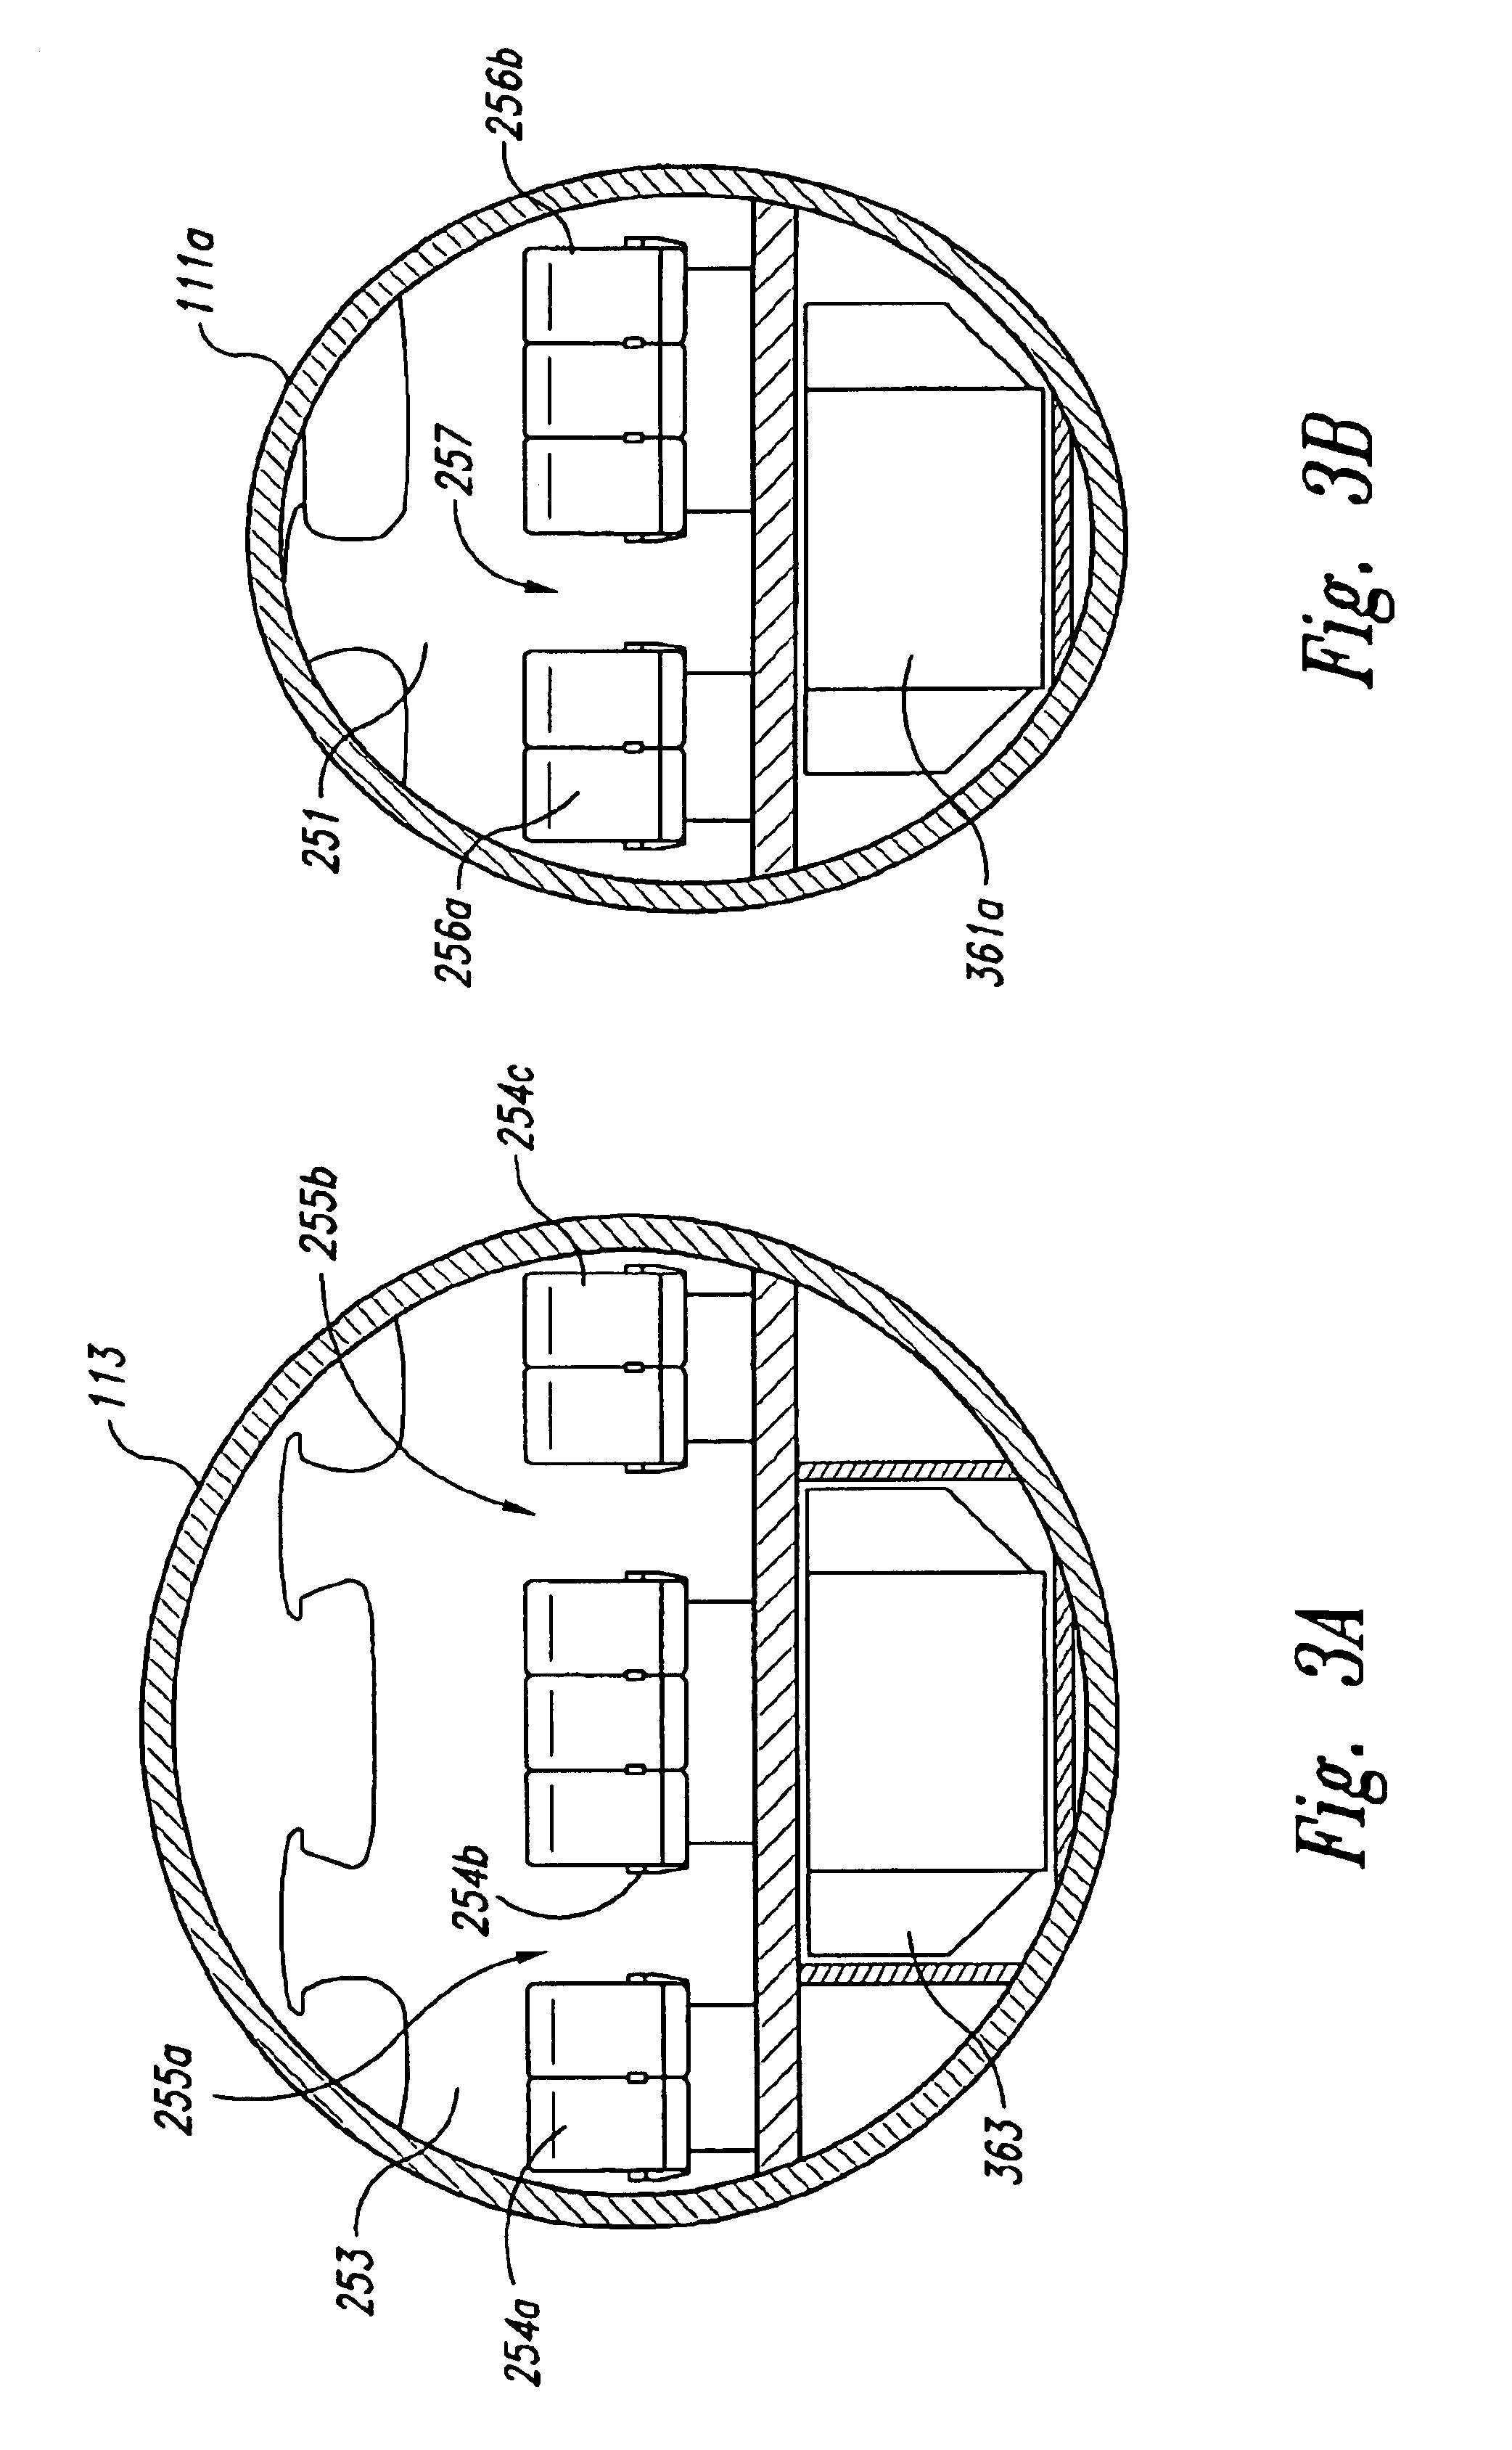 Tri-body aircraft and methods for their manufacture